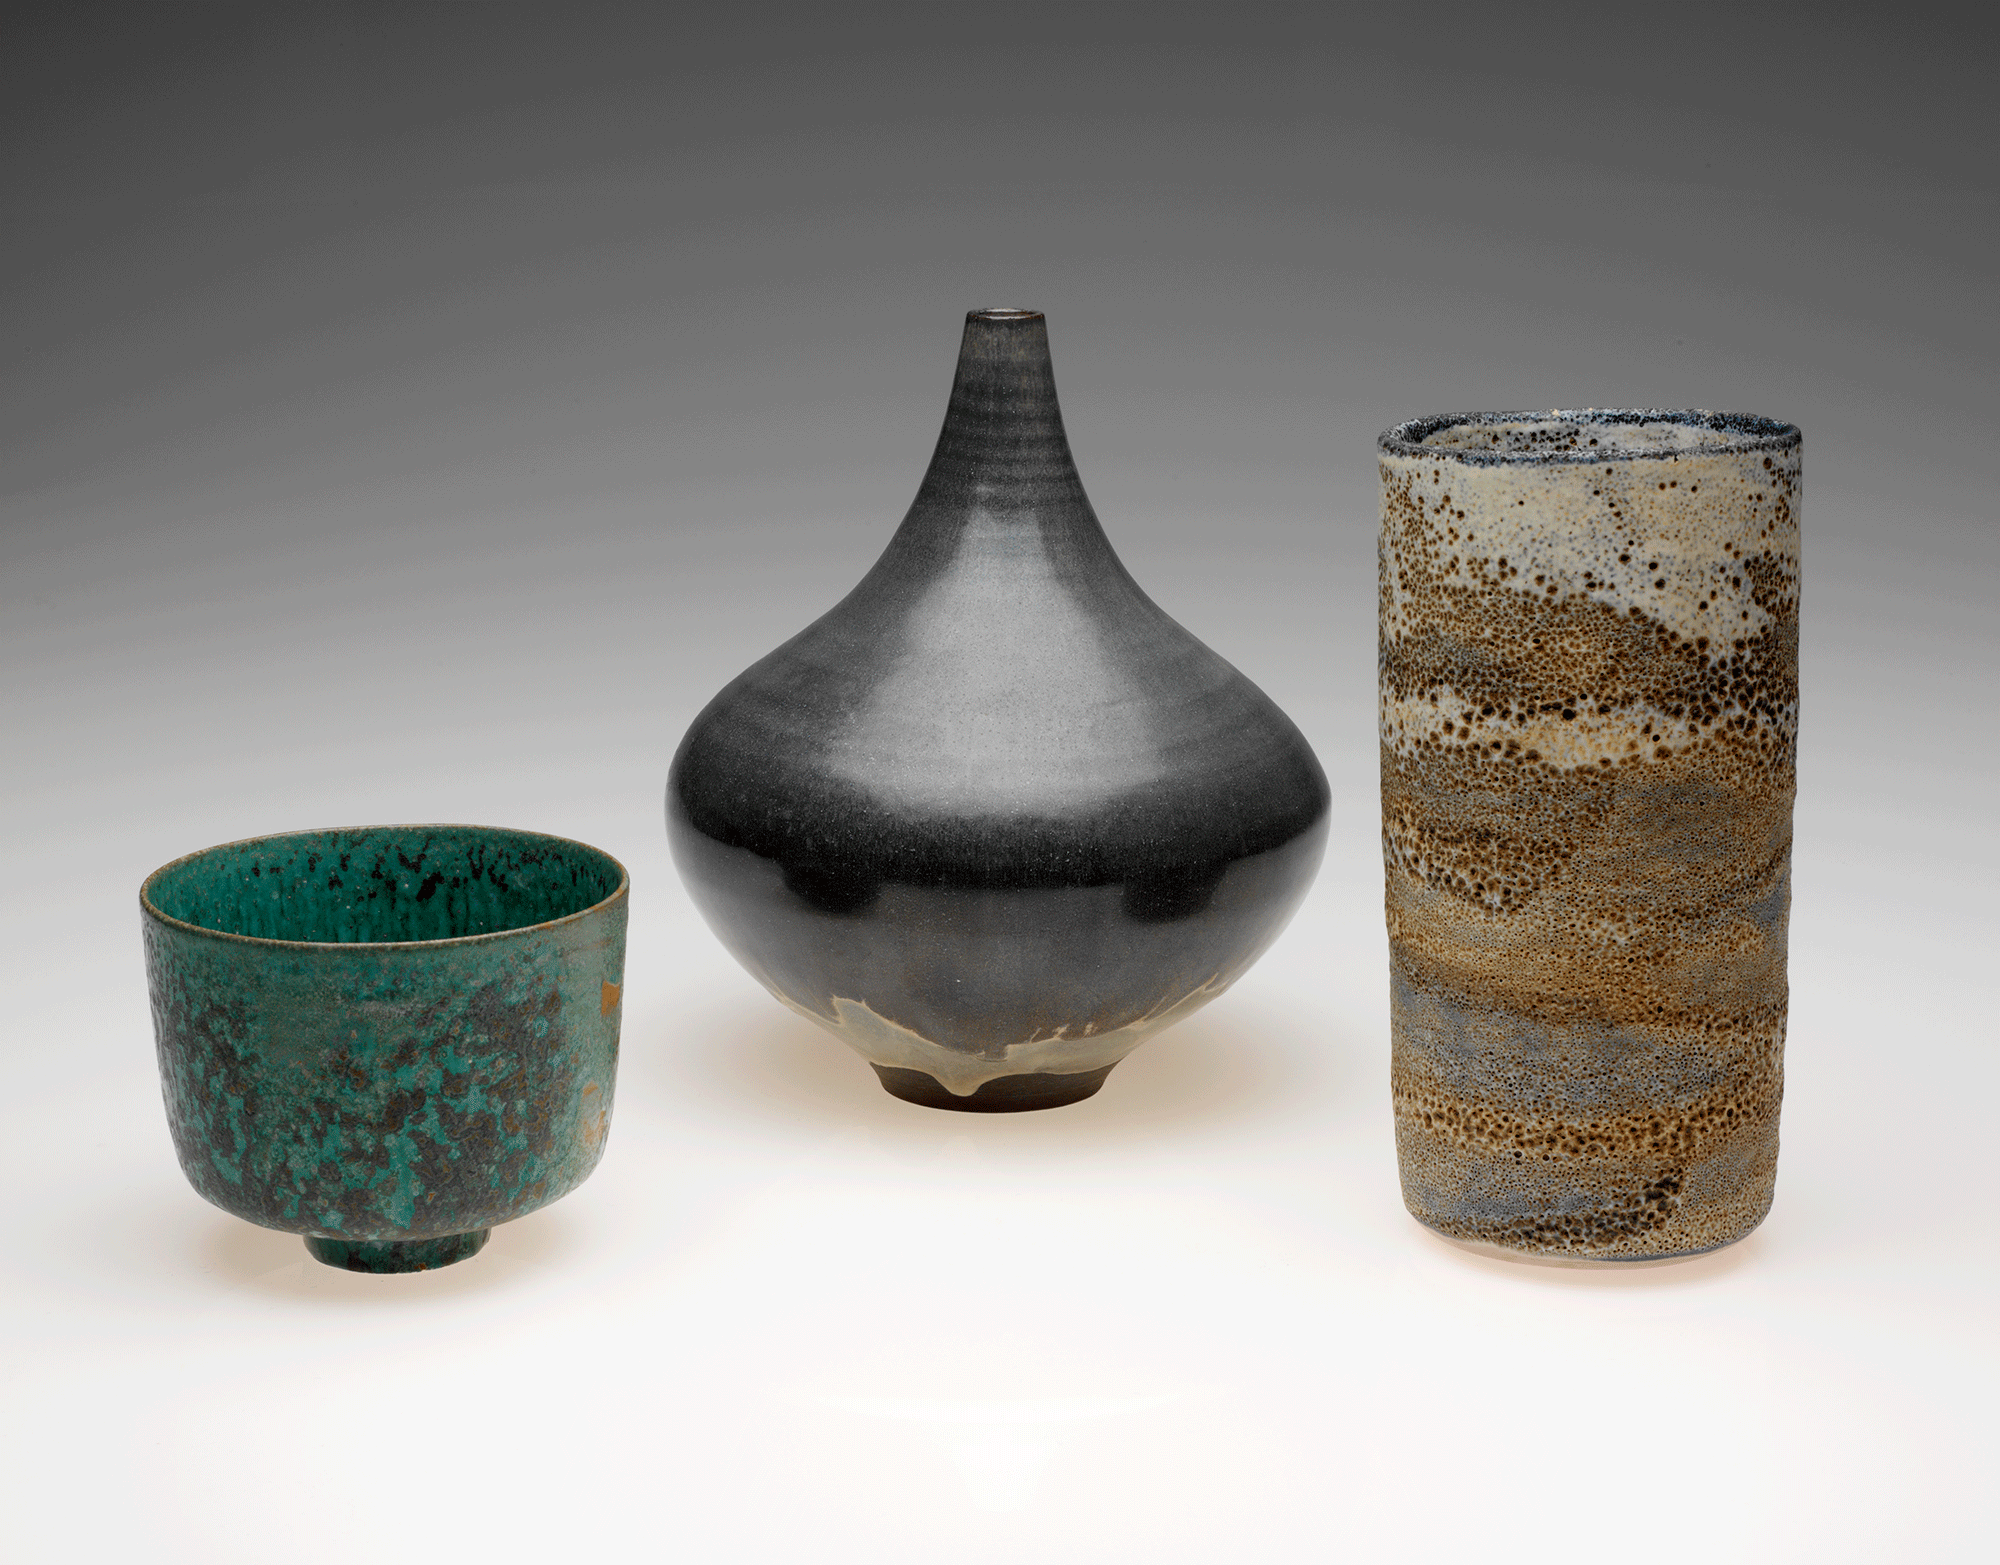 Group of three vessels. A small, green bowl is on the left. A dark gray bottle is in the middle, and a cylindrical vessel is on the right.